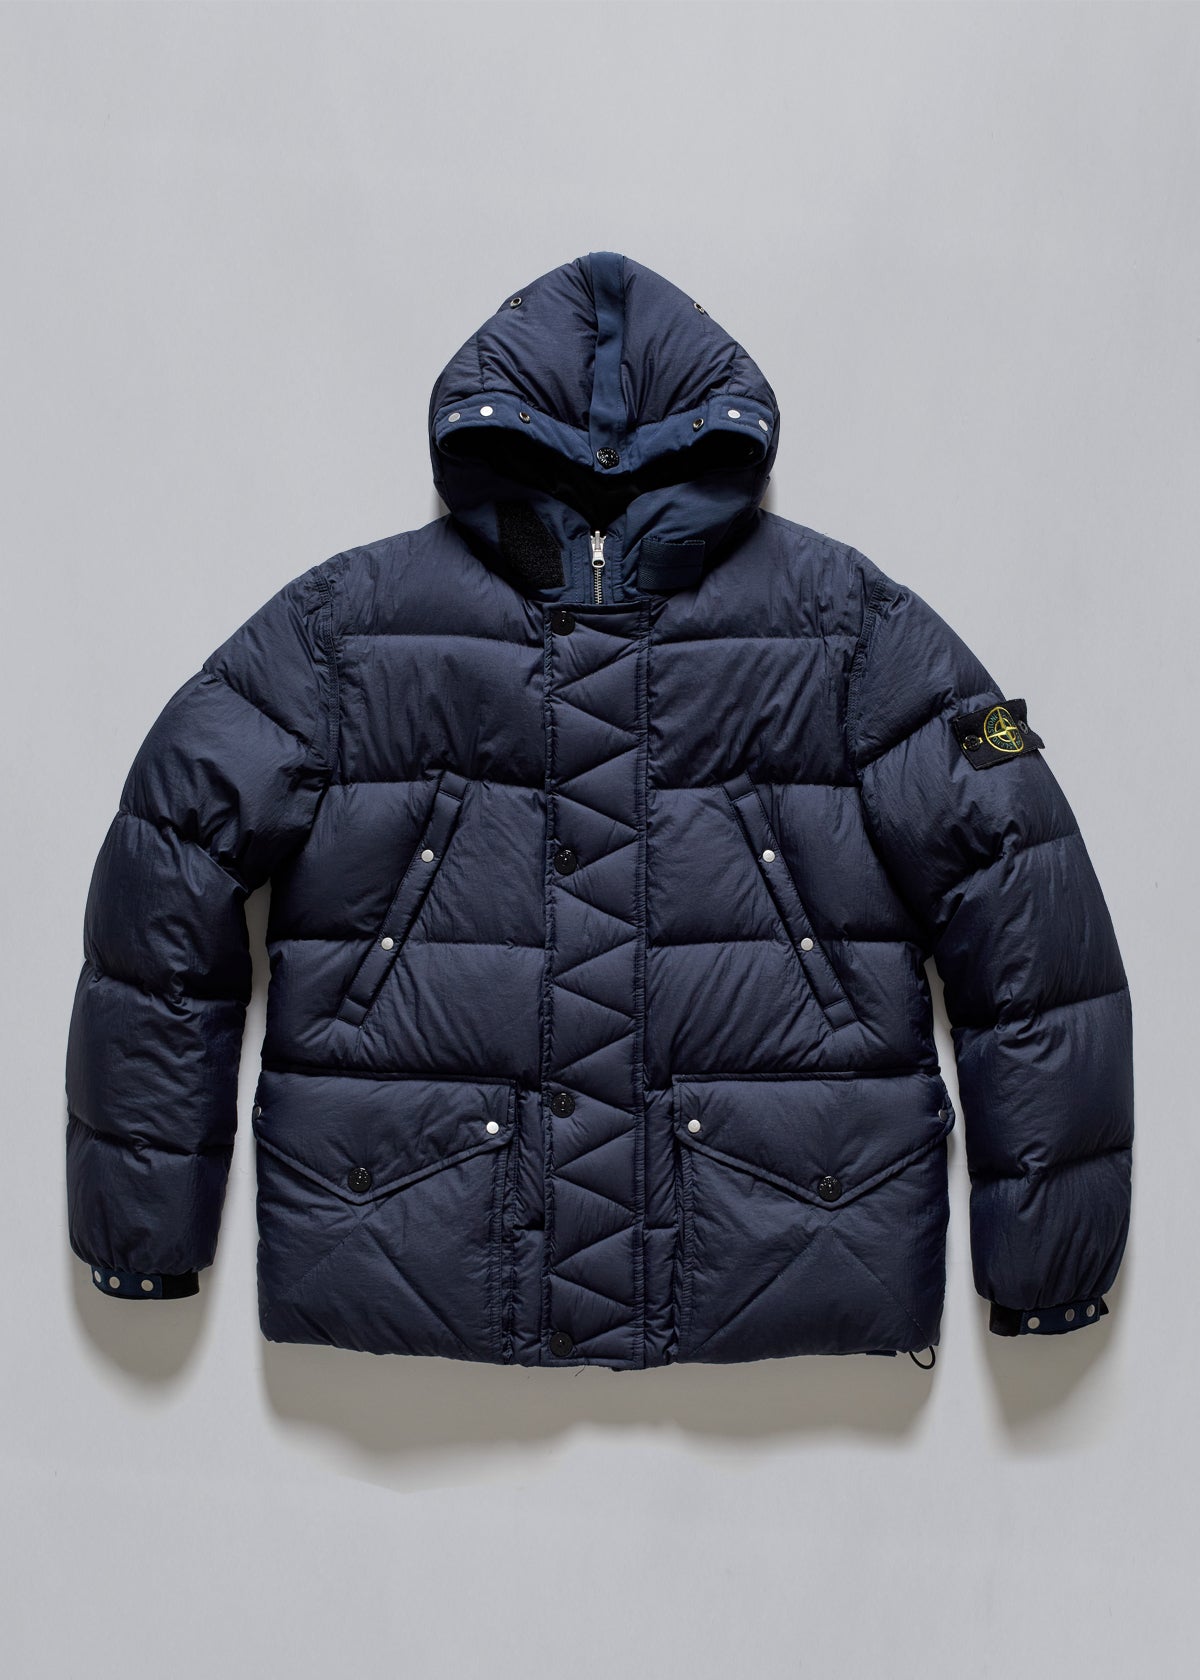 Reversible Goose Down Jacket Navy AW2010 - Large - The Archivist Store